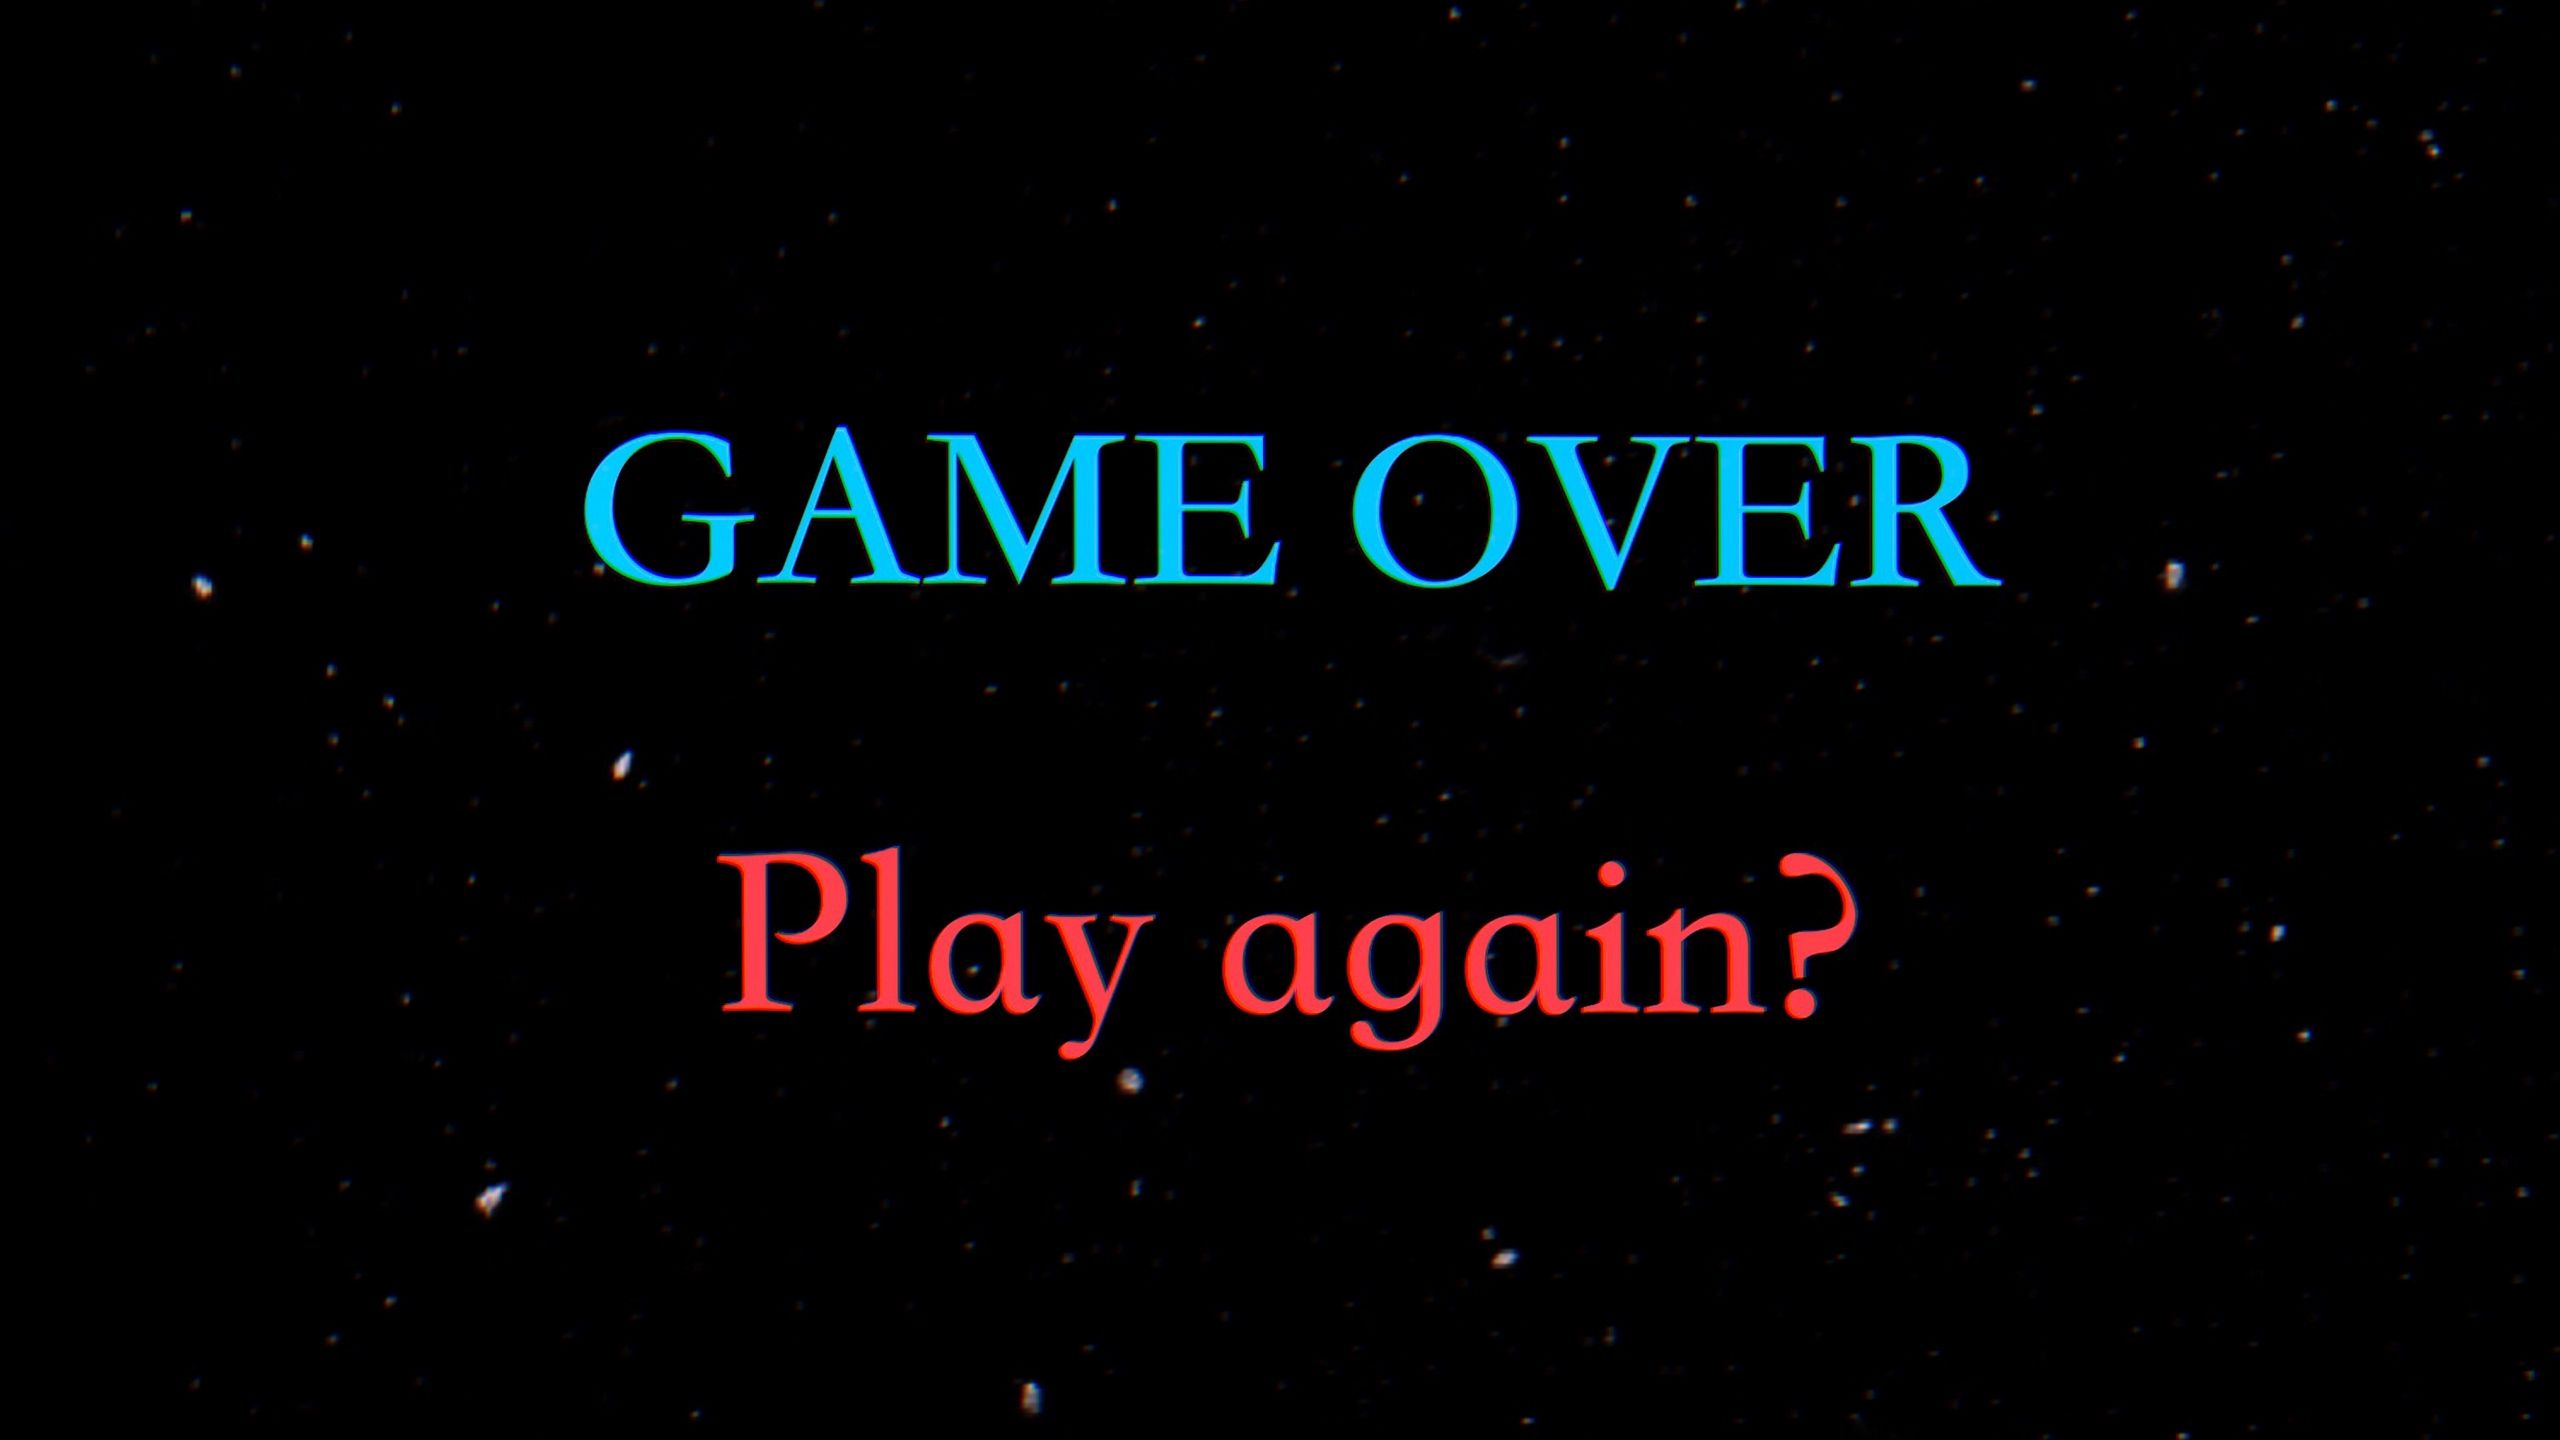 2560x1440 Download wallpaper 2560x1440 inscription, game over, text widescreen